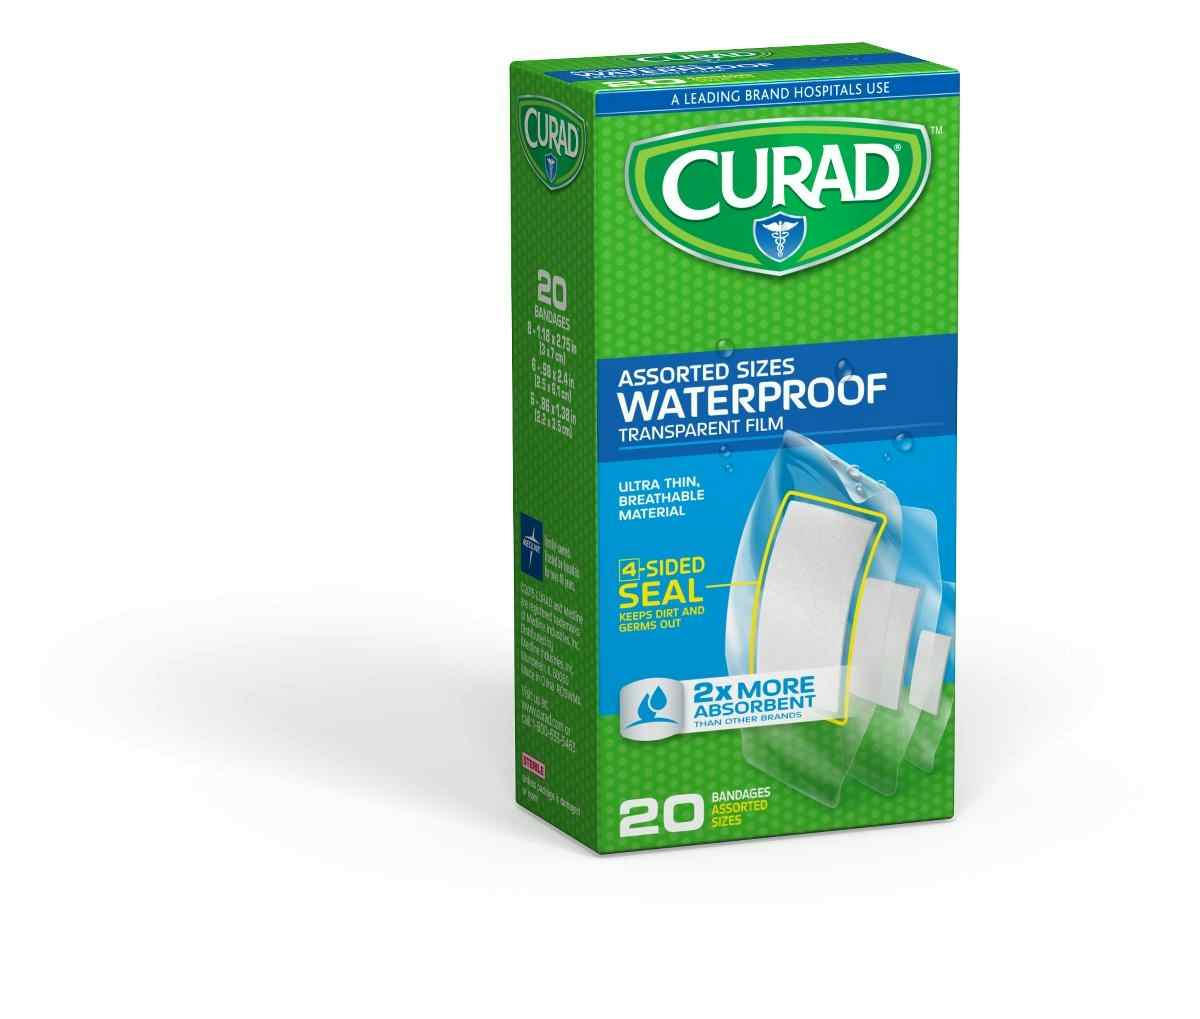 Curad Clear Waterproof Adhesive Bandages, Assorted Sizes, CUR5108, Assorted Sizes - Case of 24